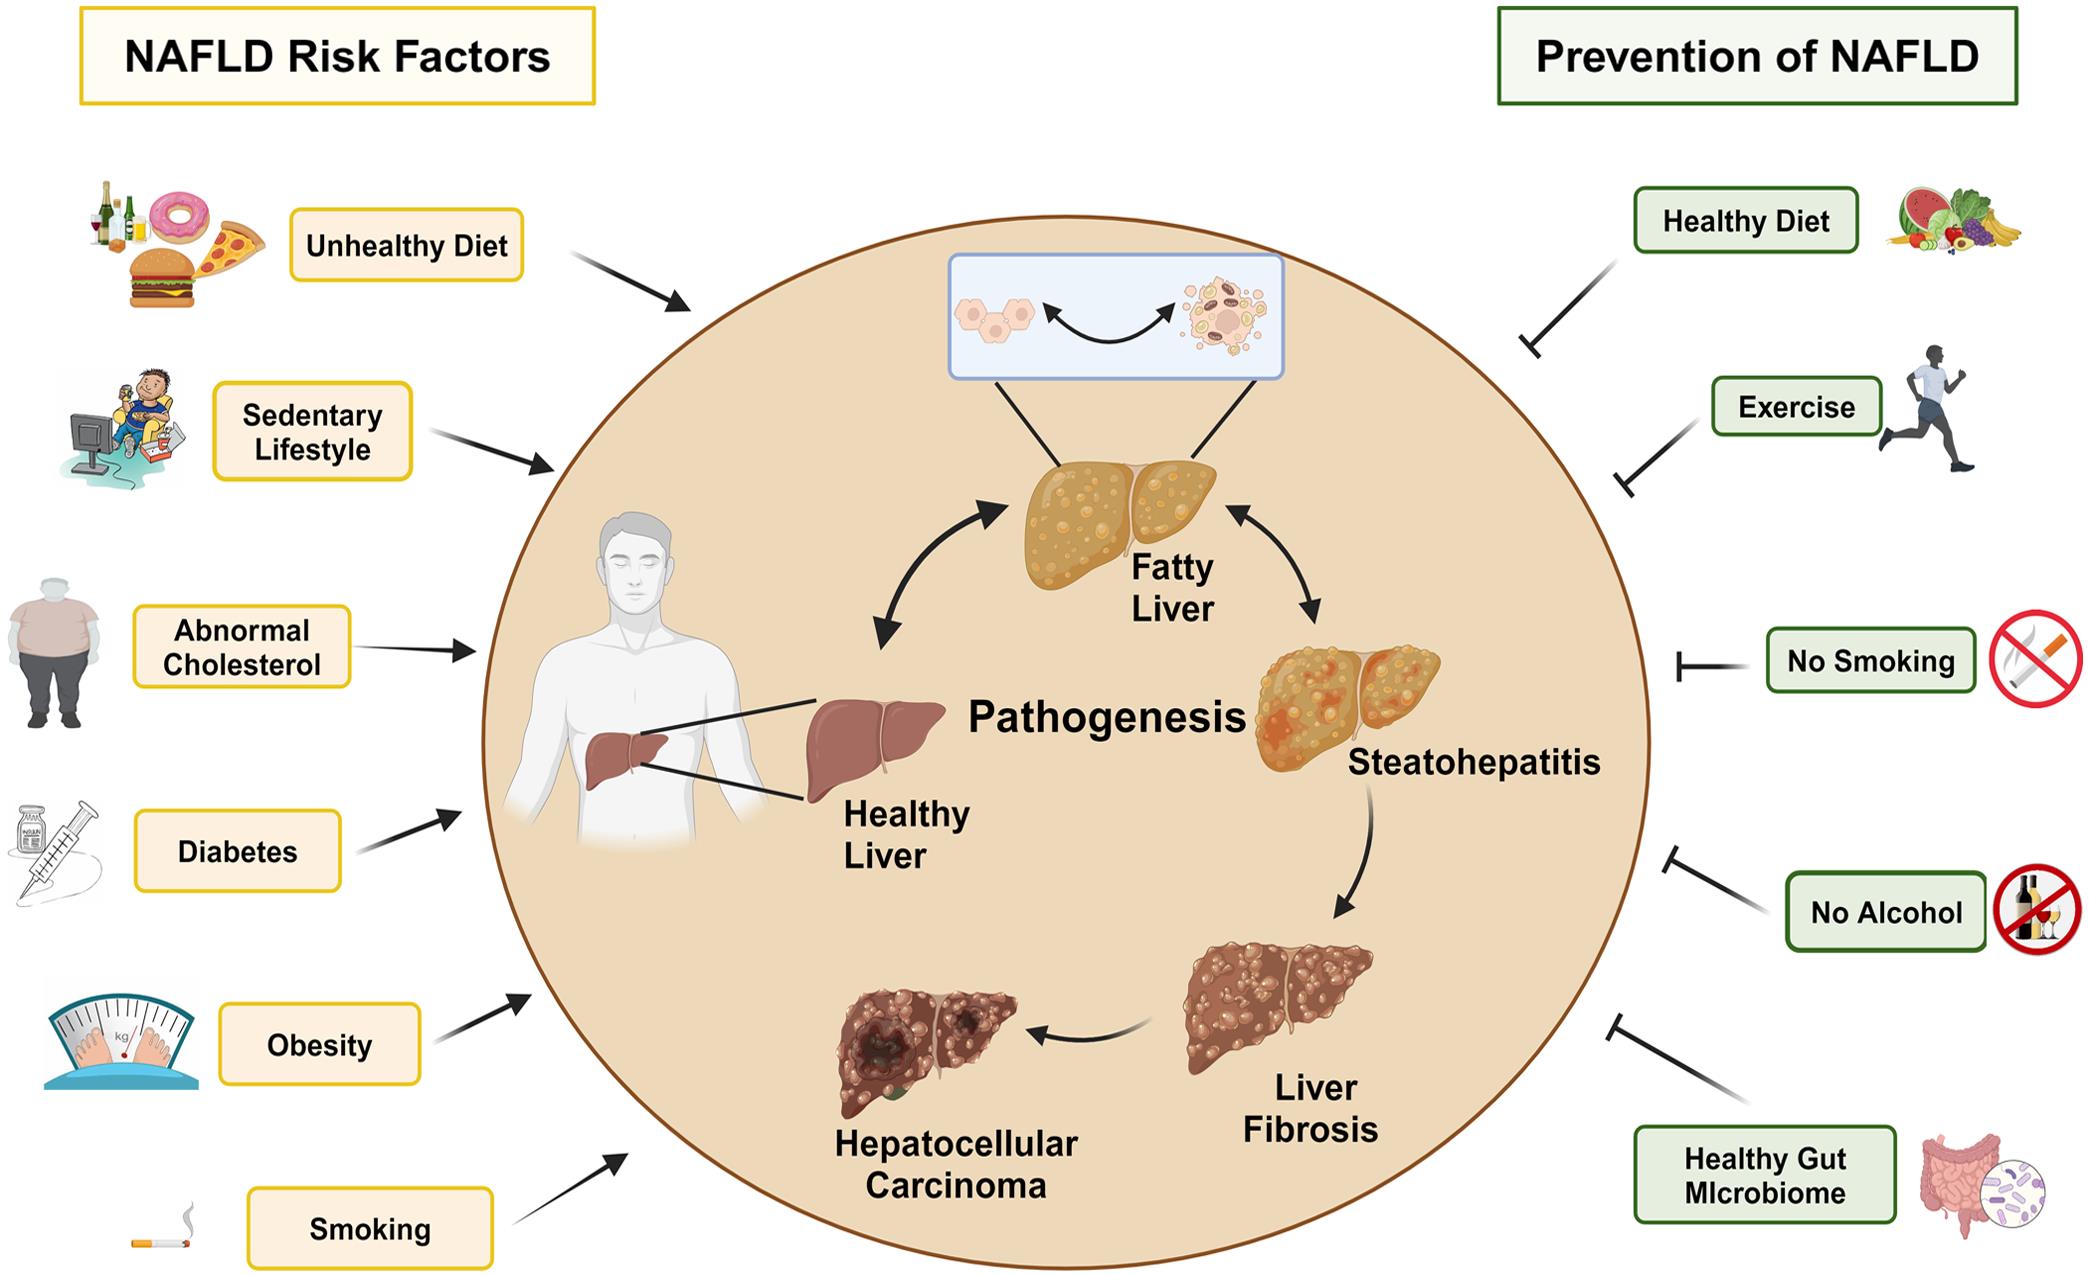 Illustration of common risks and the prevention of NAFLD. NAFLD, nonalcoholic fatty liver disease.